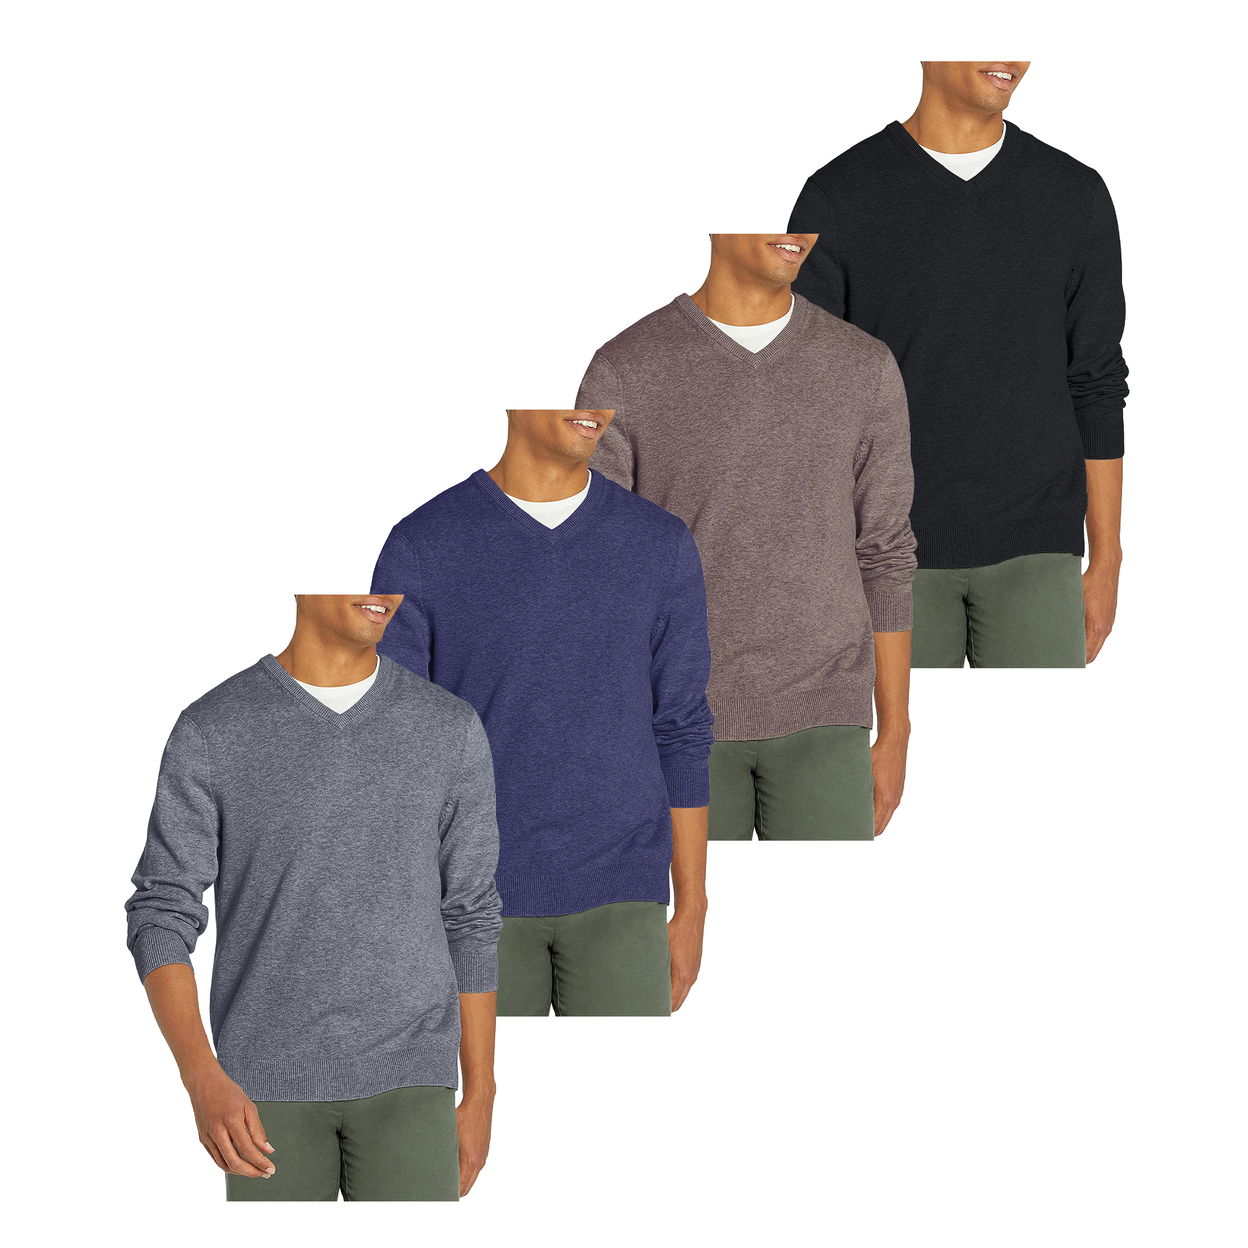 Multi-Pack: Men's Casual Ultra Soft Slim Fit Warm Knit V-Neck Sweater - 2-pack, Large